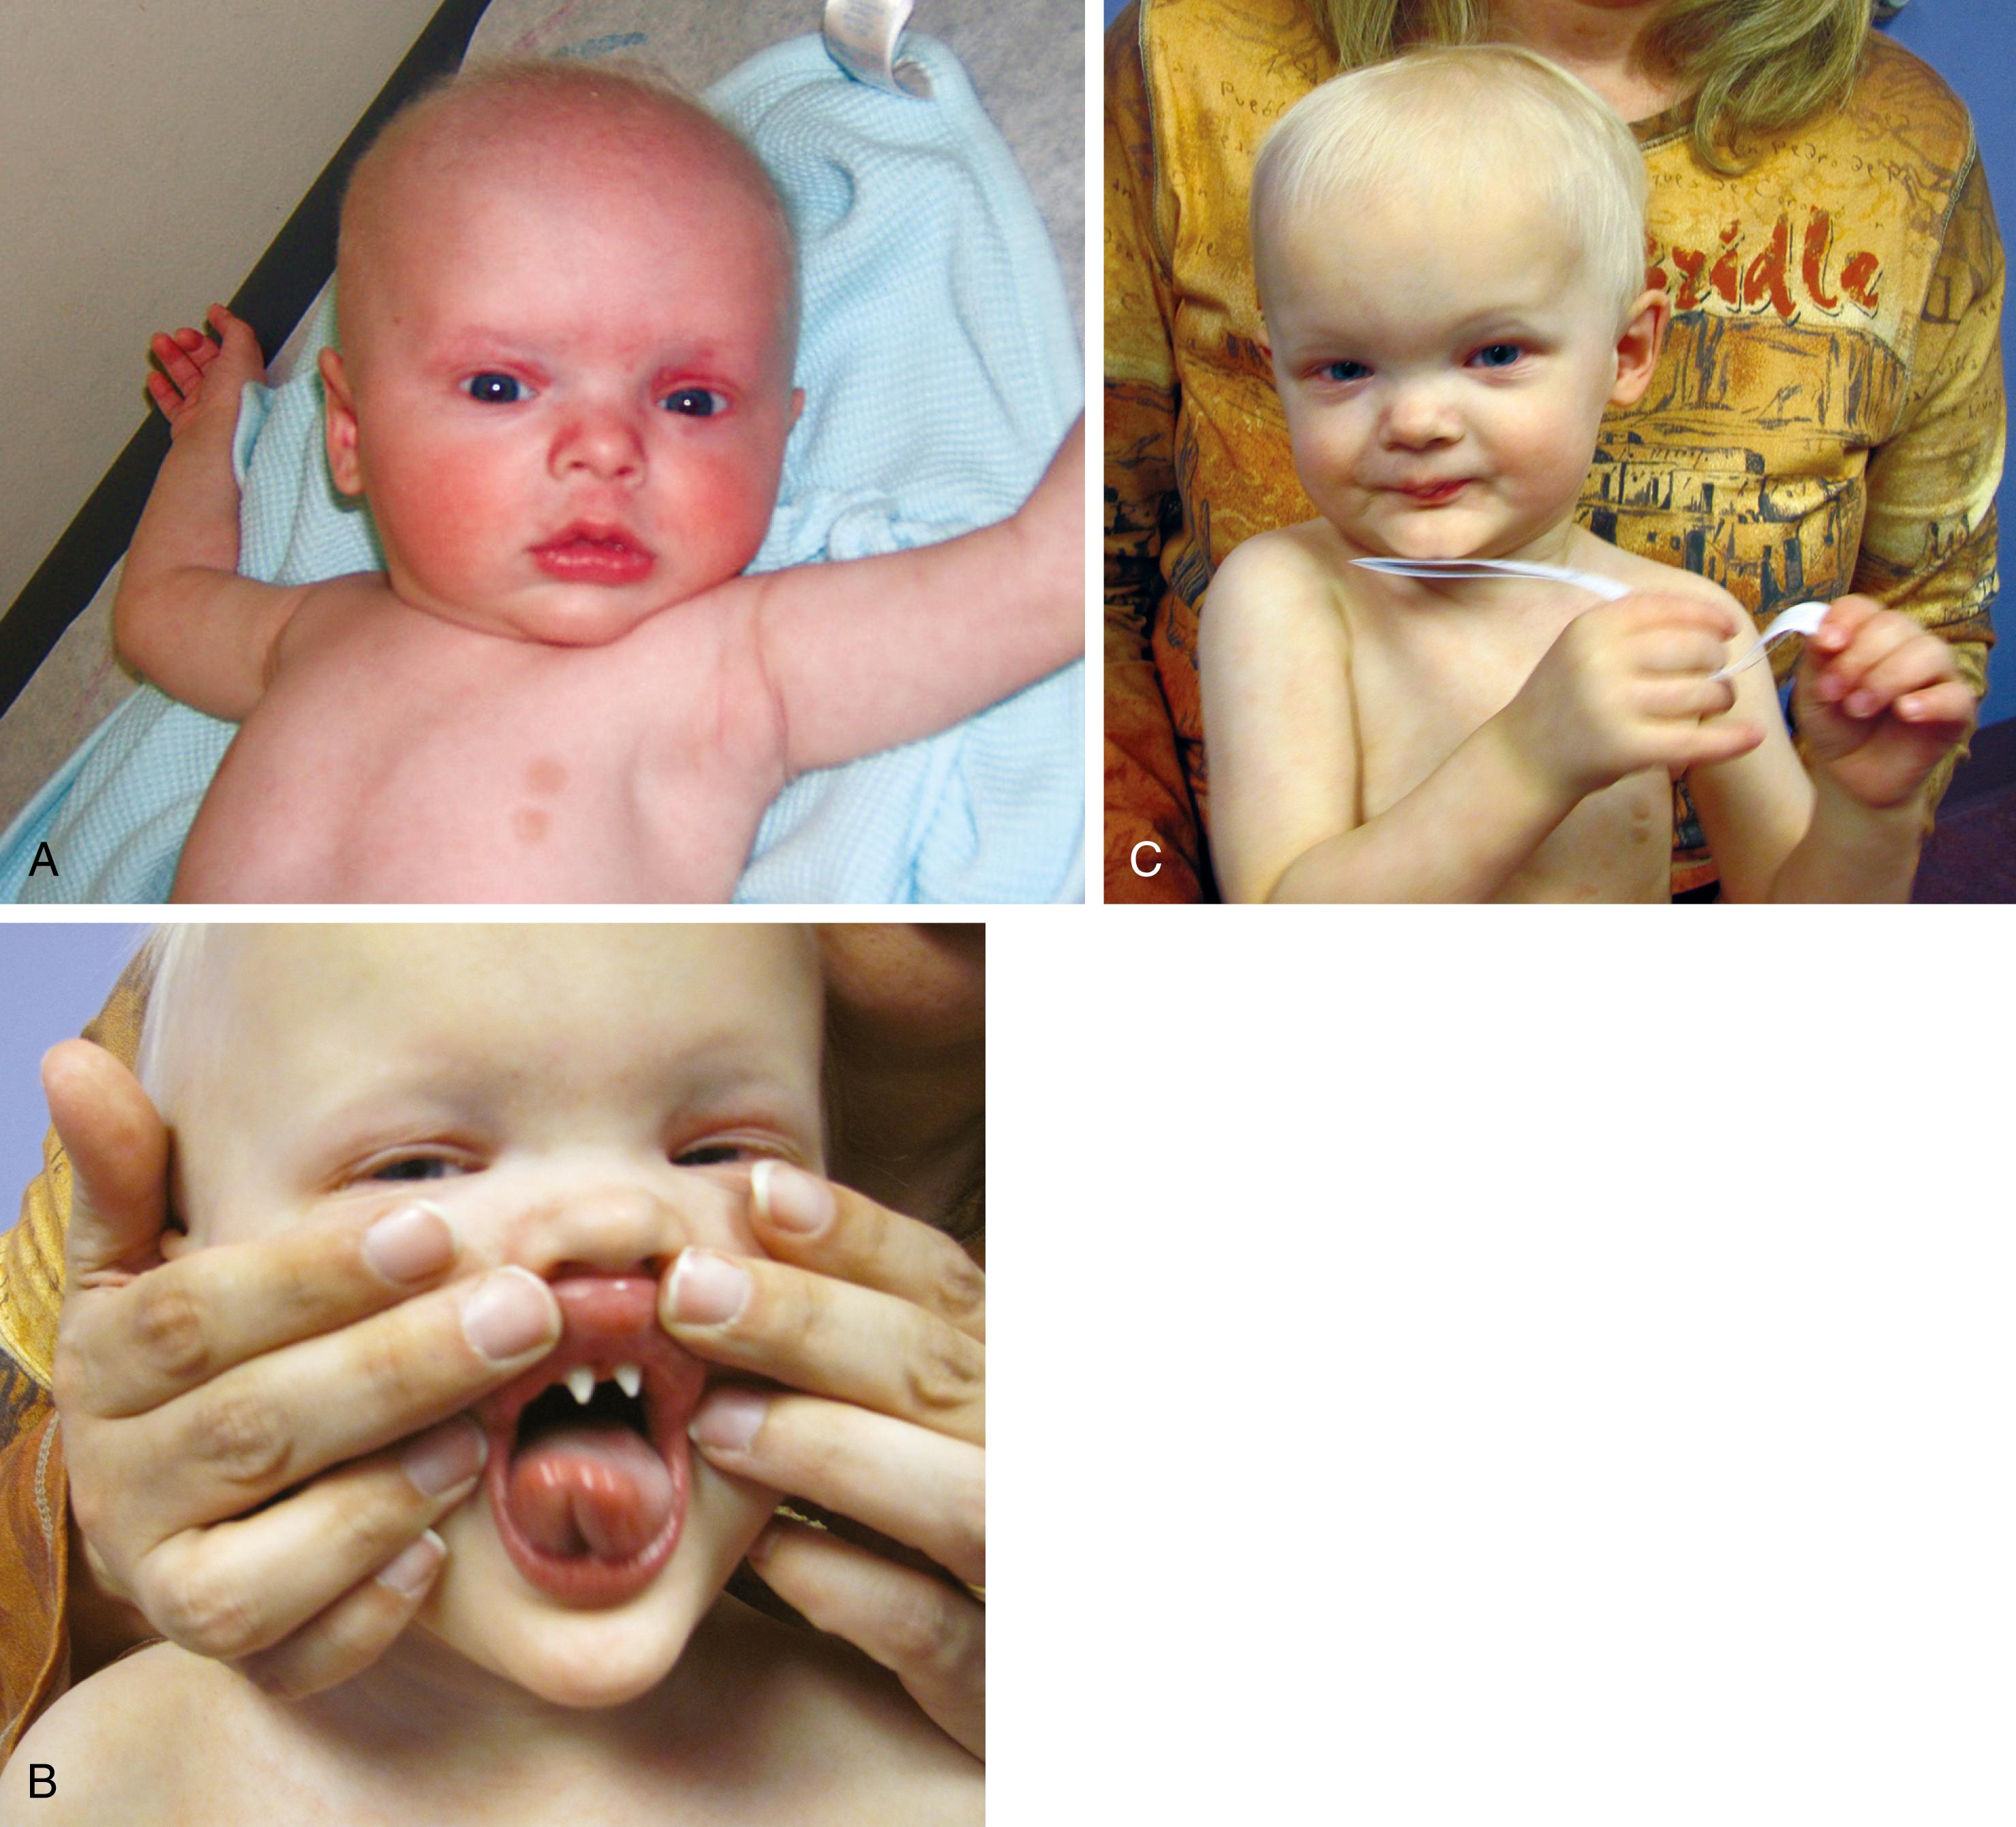 Fig. 1.28, Classic presentation for features of X-linked recessive hypohidrotic ectodermal dysplasia at 1 to 20 months of age. At 1 month the infant was admitted to “rule out sepsis” with high fever, but the workup was negative. (A) Note the thin, sparse, fine hair. (B) Severe hypodontia and anterior conical teeth. (C) Low nasal bridge, periorbital wrinkling, full forehead, prominent lips, and prominent supraorbital ridges. Sequencing of the EDA1 gene showed the missense pathogenic variant and confirmed the clinical diagnosis. The mother and her maternal female relatives have variable and milder clinical features.